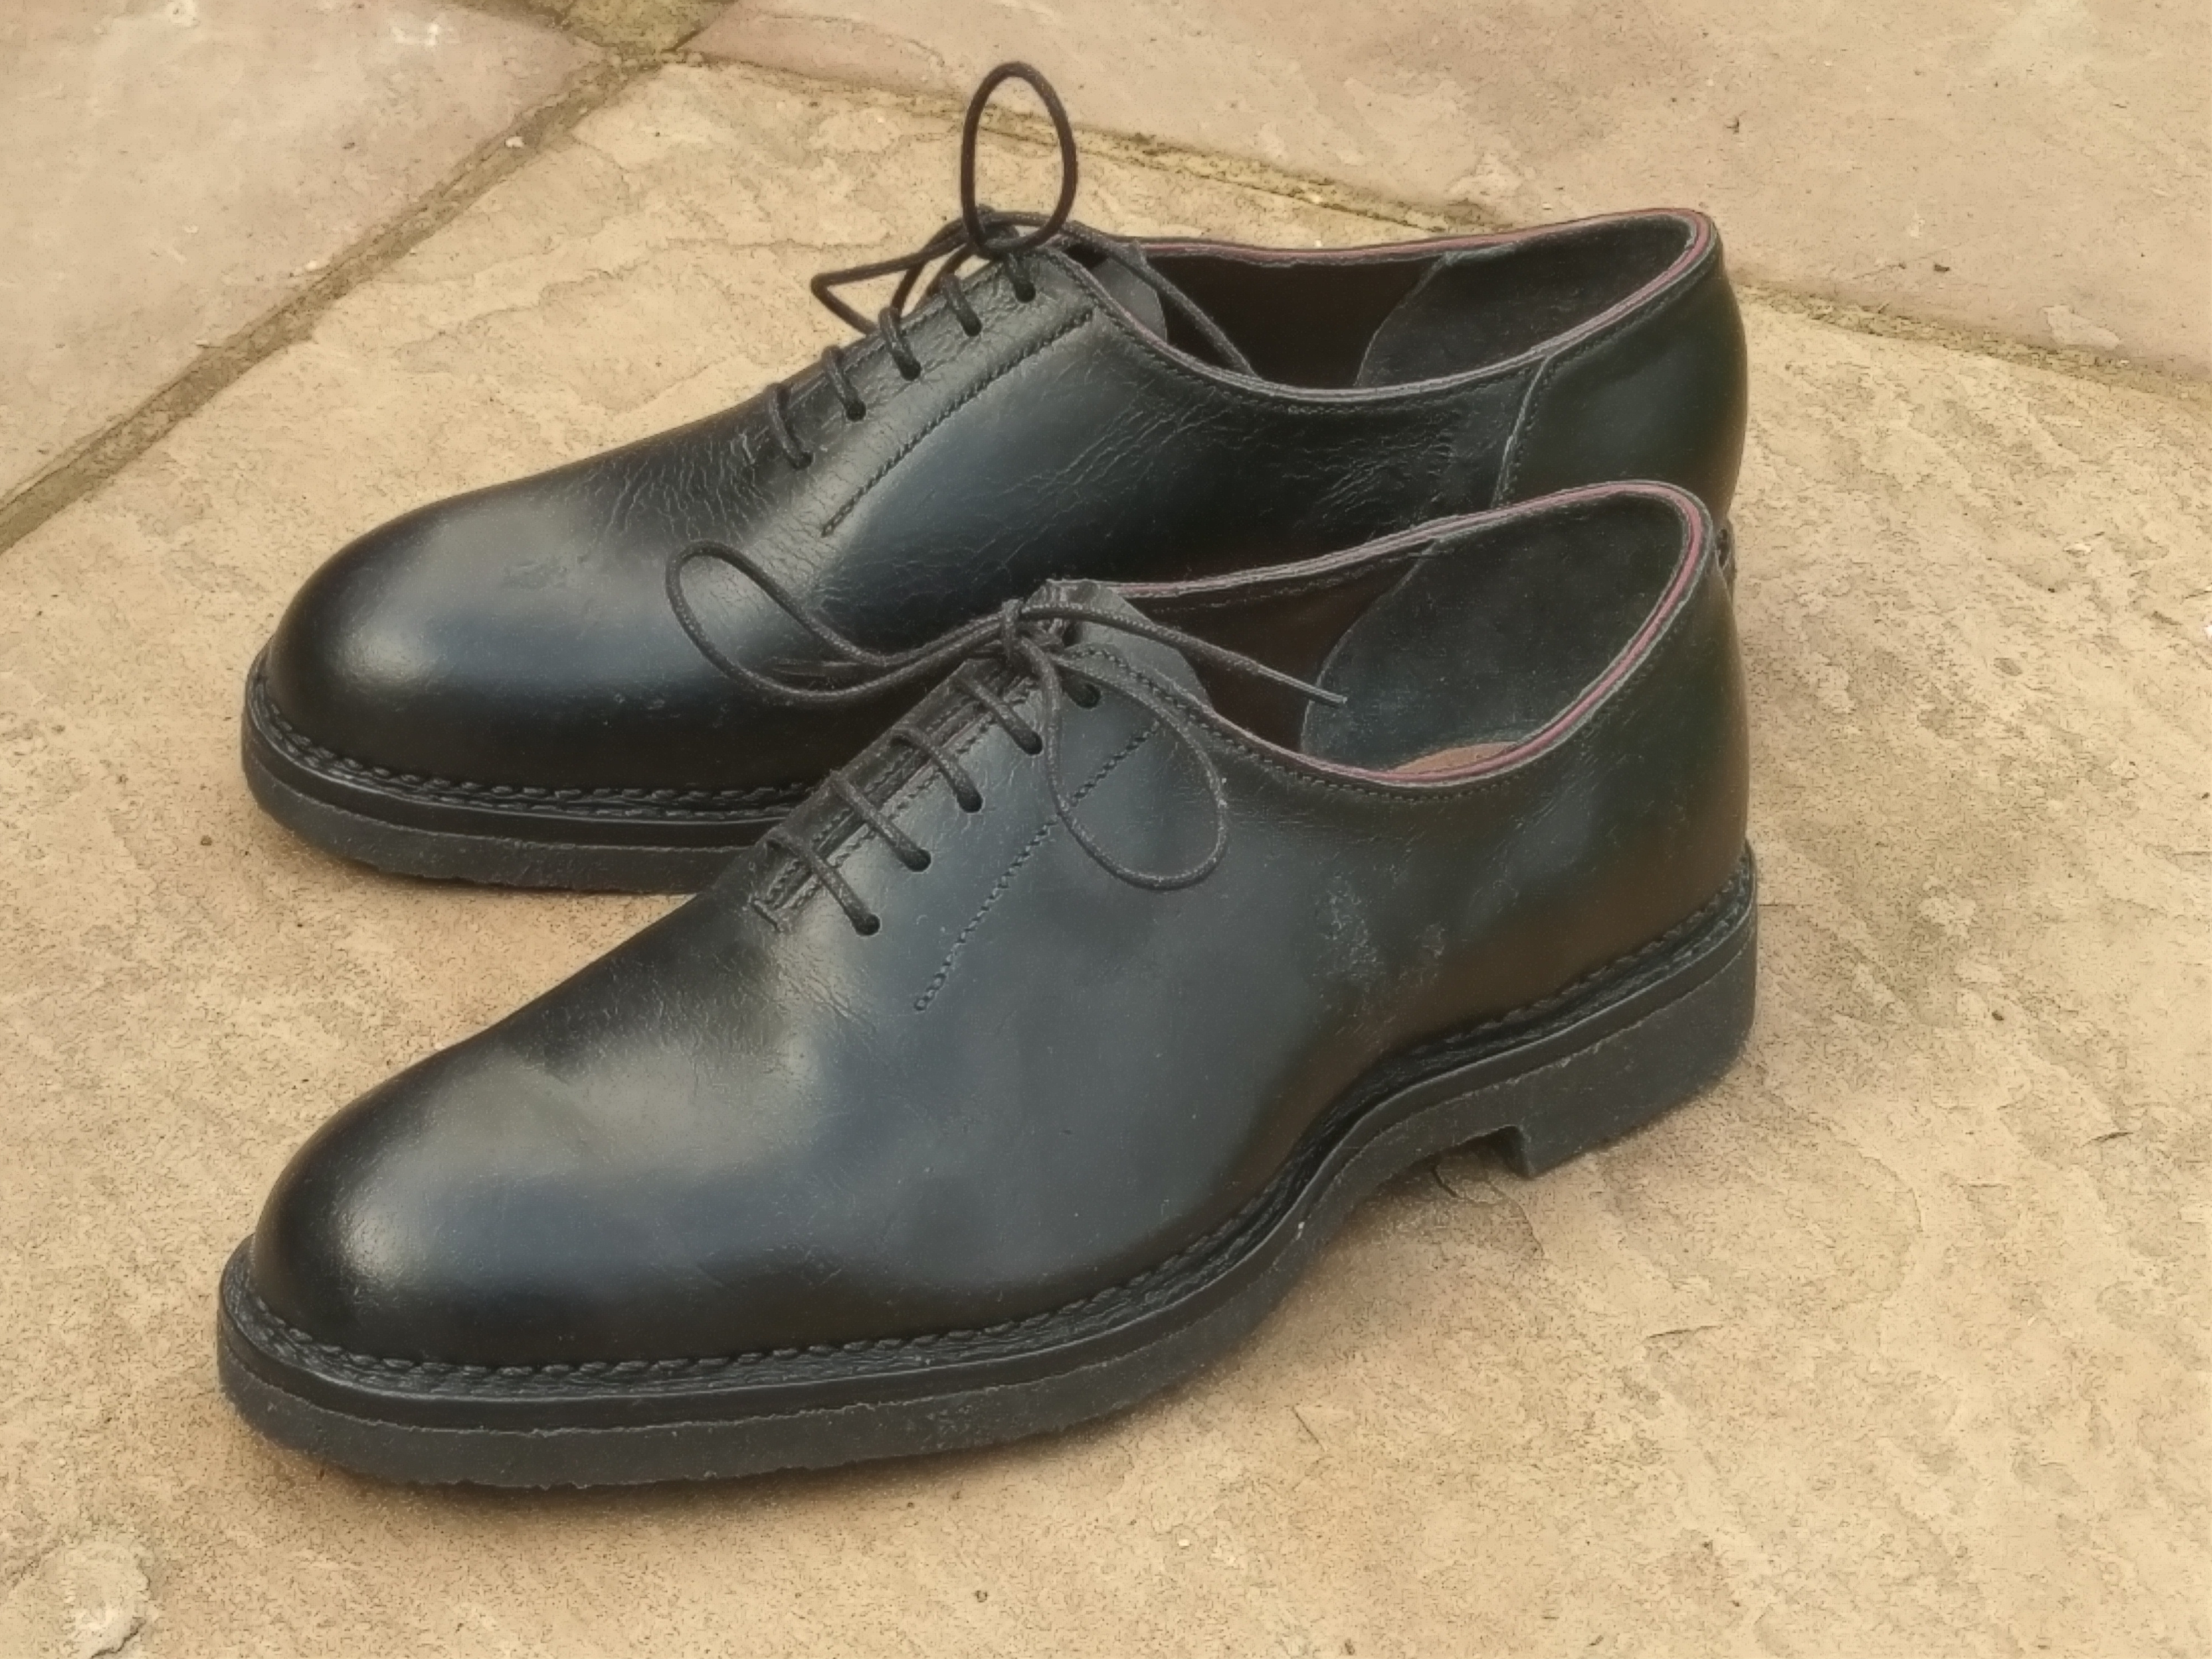 Gents Oxfords, whole cut with Norwegian welt and crepe soe, in CFS African Kudu - Black - made by Philip Bishop